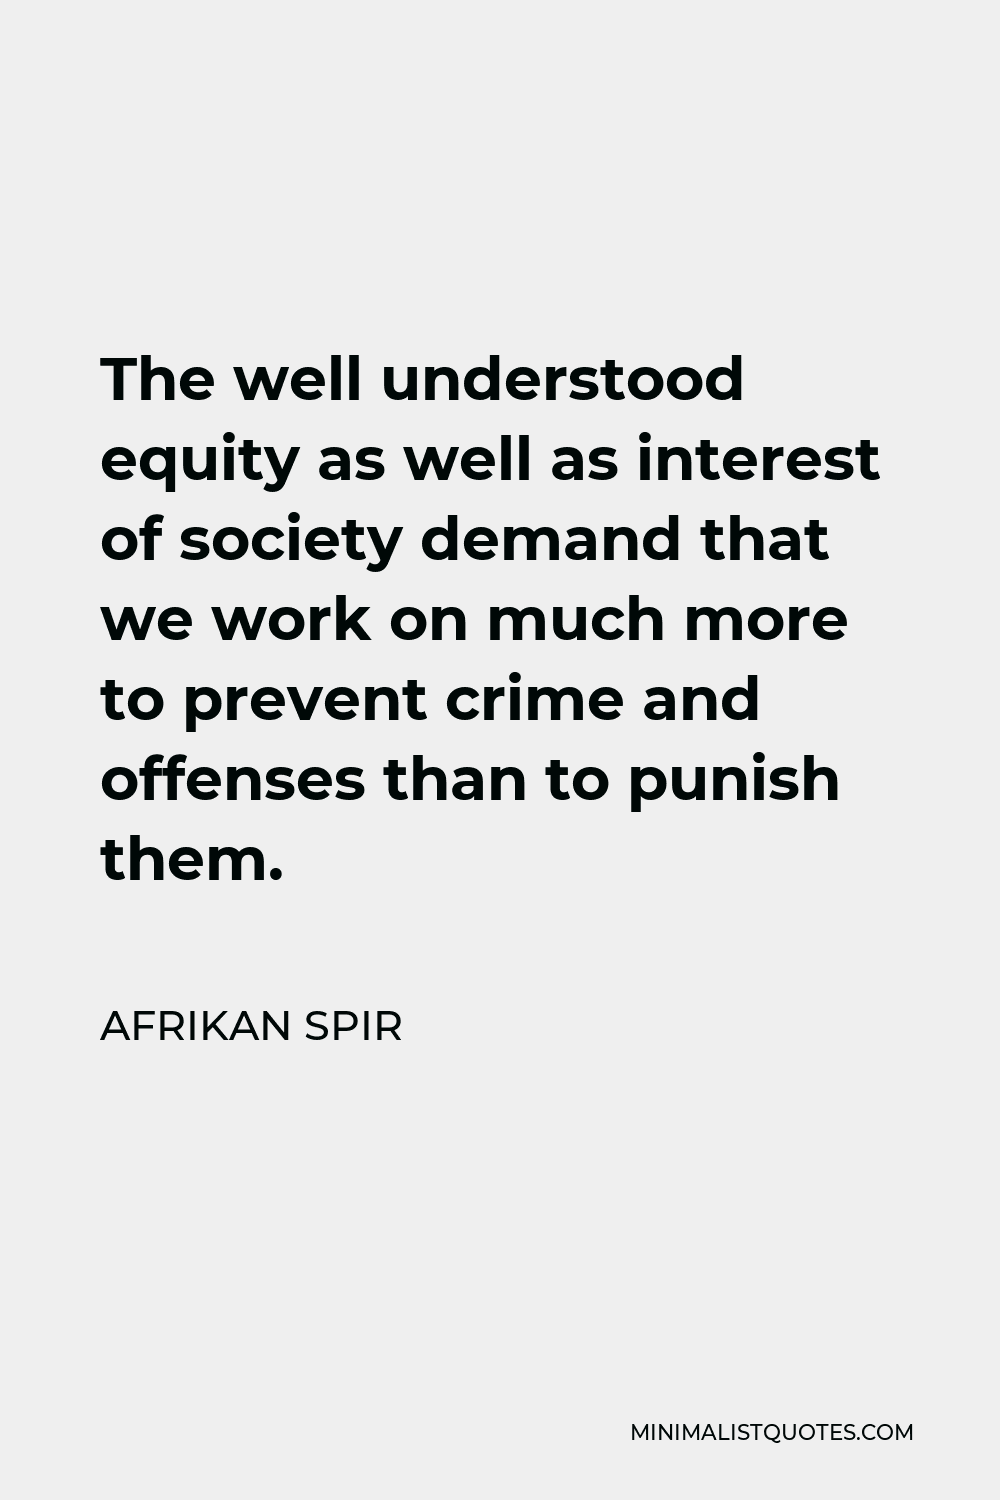 Afrikan Spir Quote - The well understood equity as well as interest of society demand that we work on much more to prevent crime and offenses than to punish them.